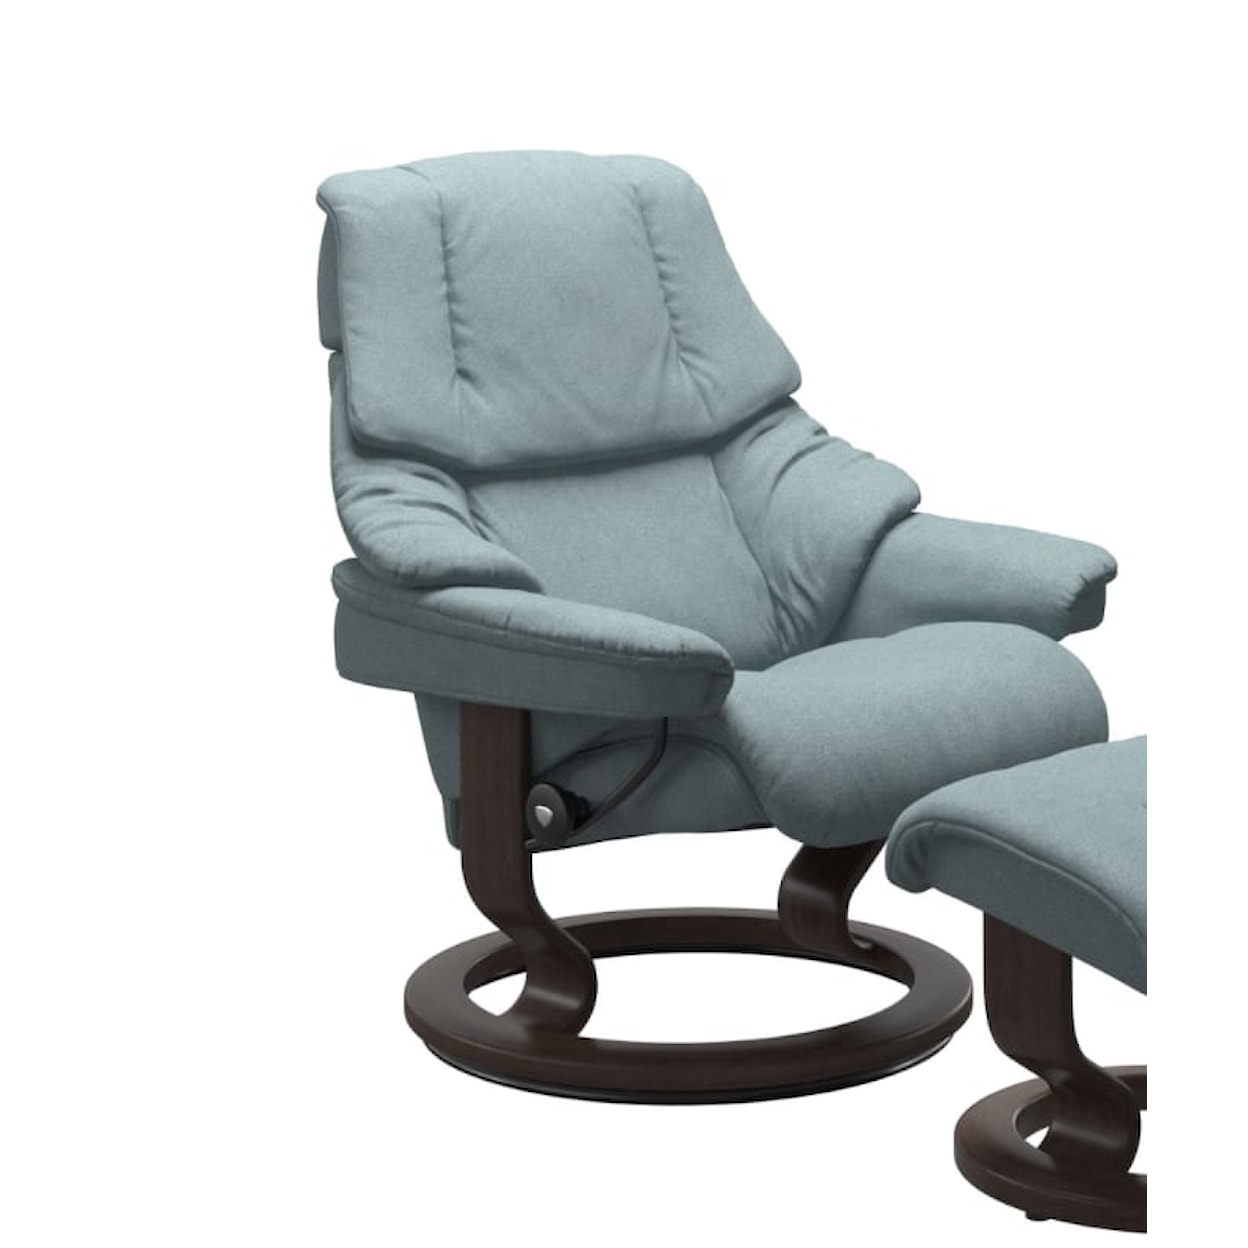 Stressless by Ekornes Reno Small Reclining Chair with Classic Base